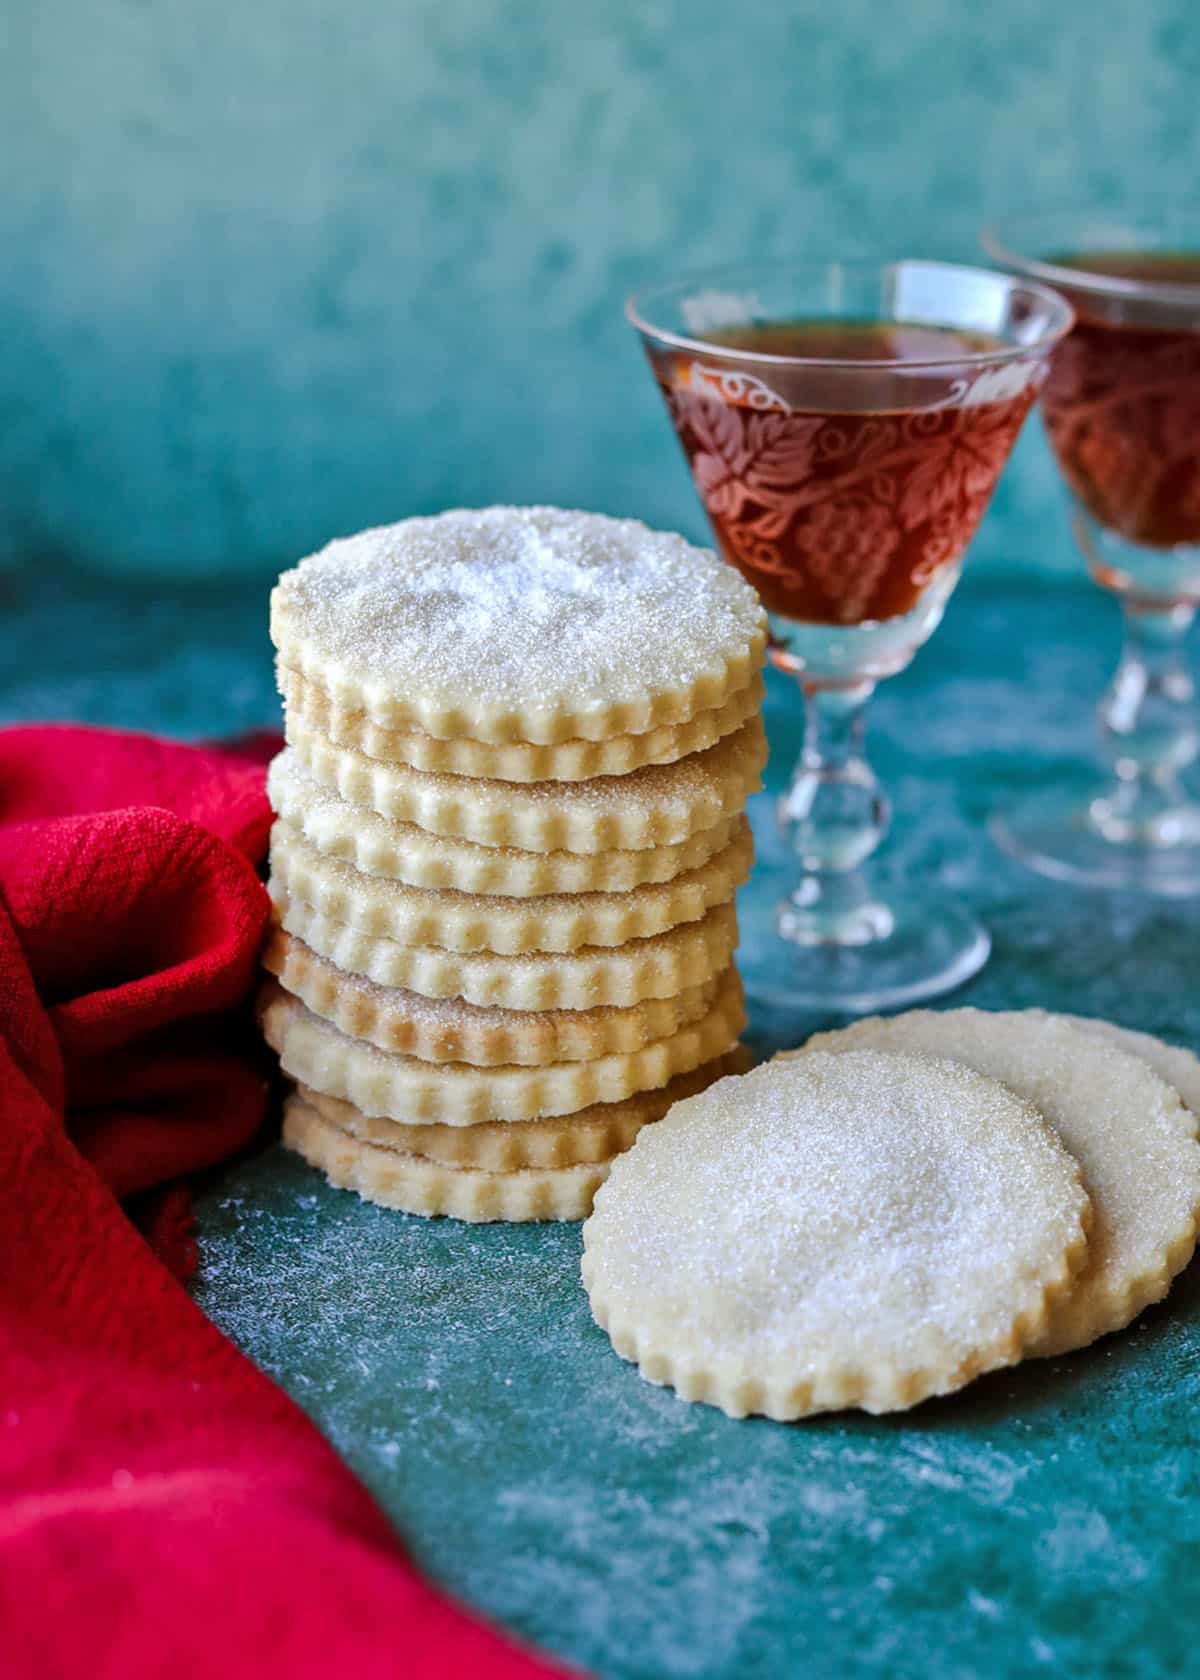 Scottish Shortbread Biscuits stacked with sherry glasses